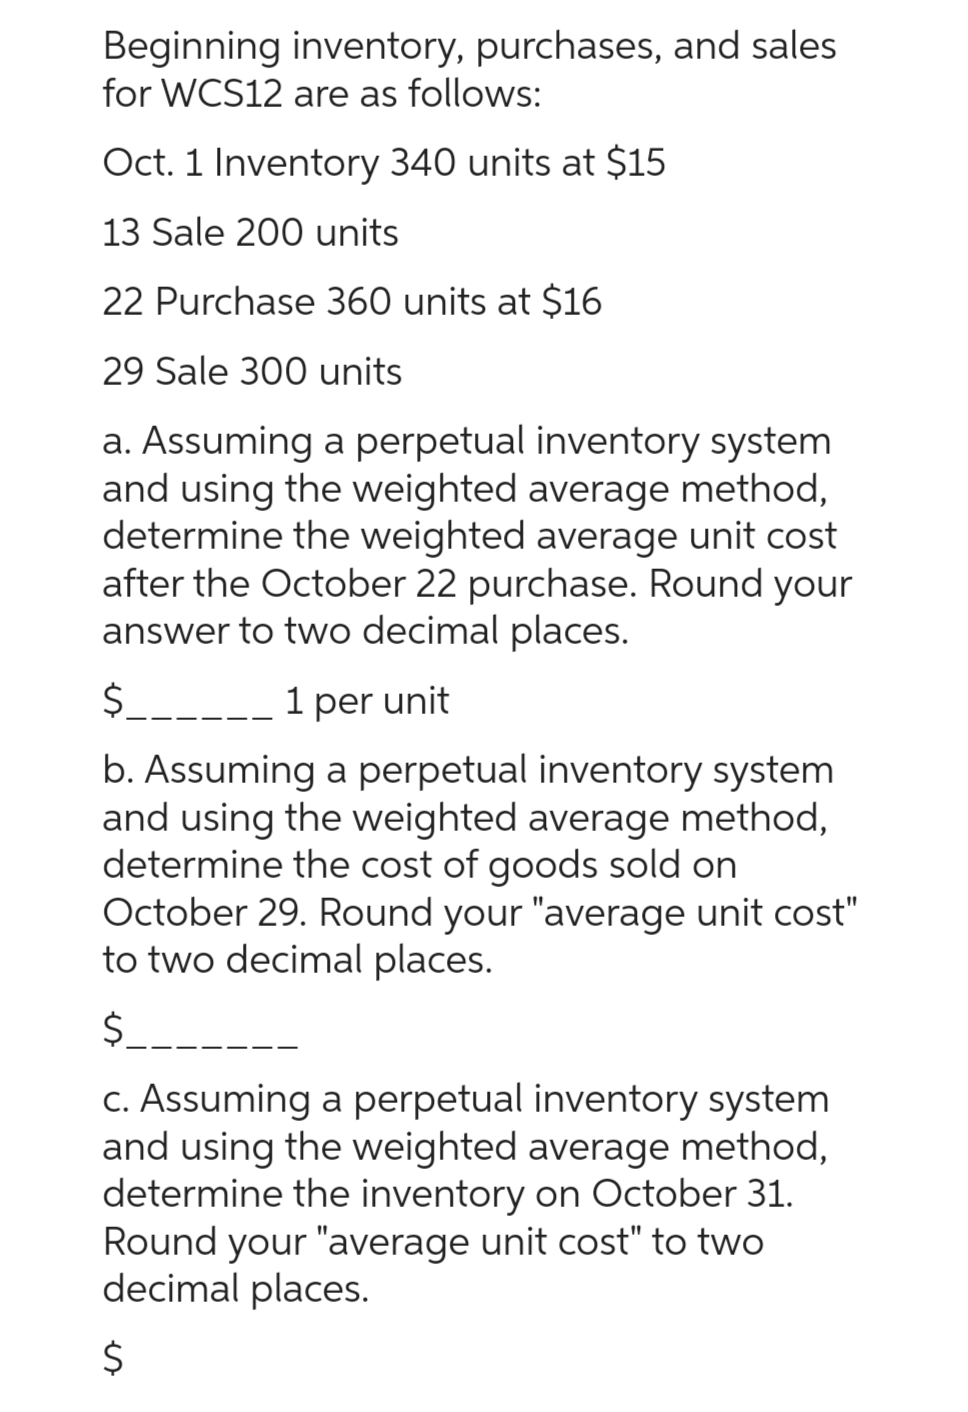 Beginning inventory, purchases, and sales
for WCS12 are as follows:
Oct. 1 Inventory 340 units at $15
13 Sale 200 units
22 Purchase 360 units at $16
29 Sale 300 units
a. Assuming a perpetual inventory system
and using the weighted average method,
determine the weighted average unit cost
after the October 22 purchase. Round your
answer to two decimal places.
$______ 1 per unit
b. Assuming a perpetual inventory system
and using the weighted average method,
determine the cost of goods sold on
October 29. Round your "average unit cost"
to two decimal places.
$____
c. Assuming a perpetual inventory system
and using the weighted average method,
determine the inventory on October 31.
Round your "average unit cost" to two
decimal places.
$